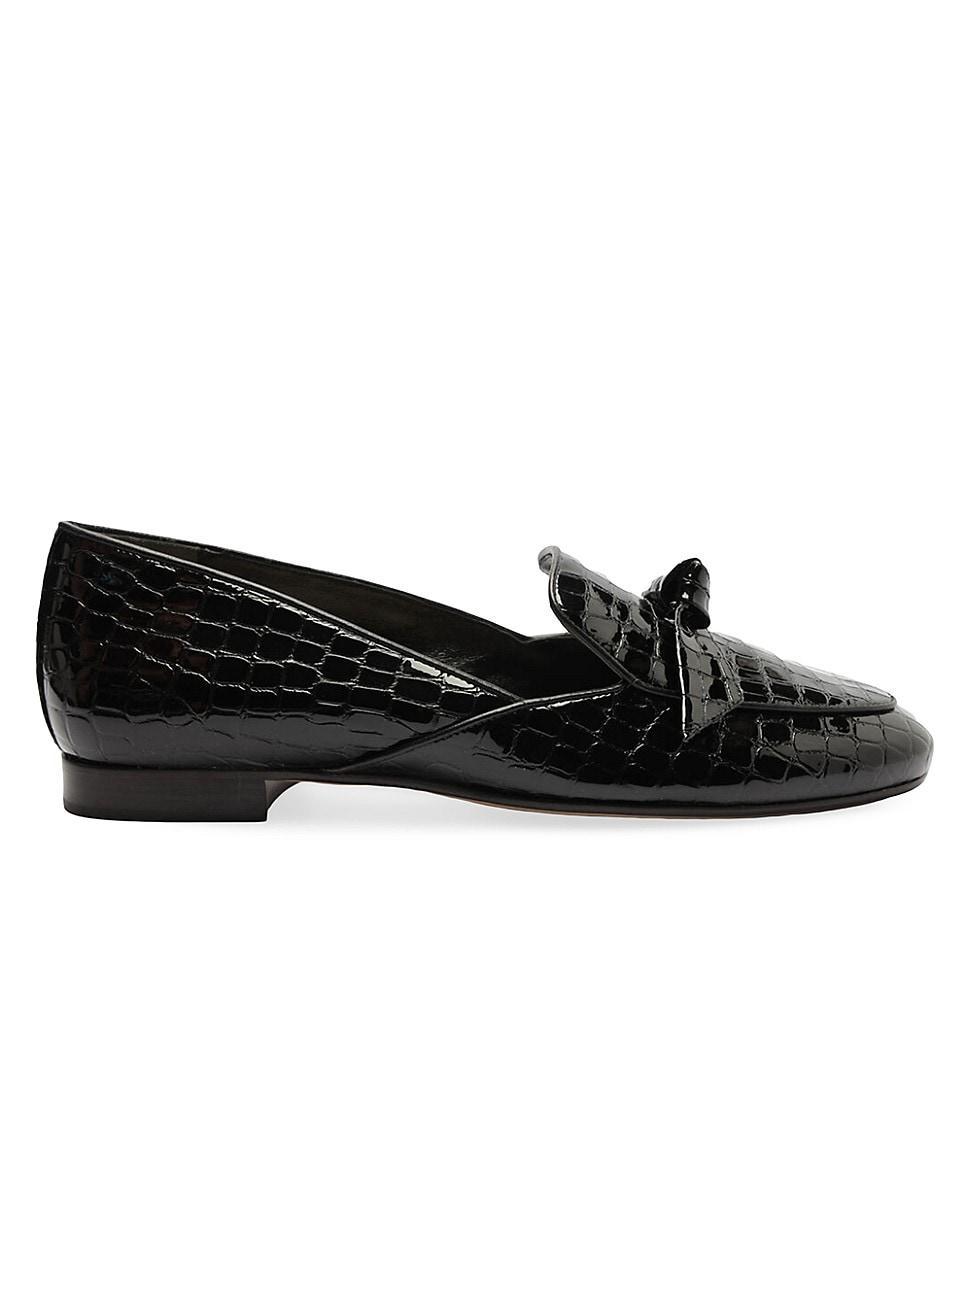 Womens Clarita Stamped Leather Loafers Product Image